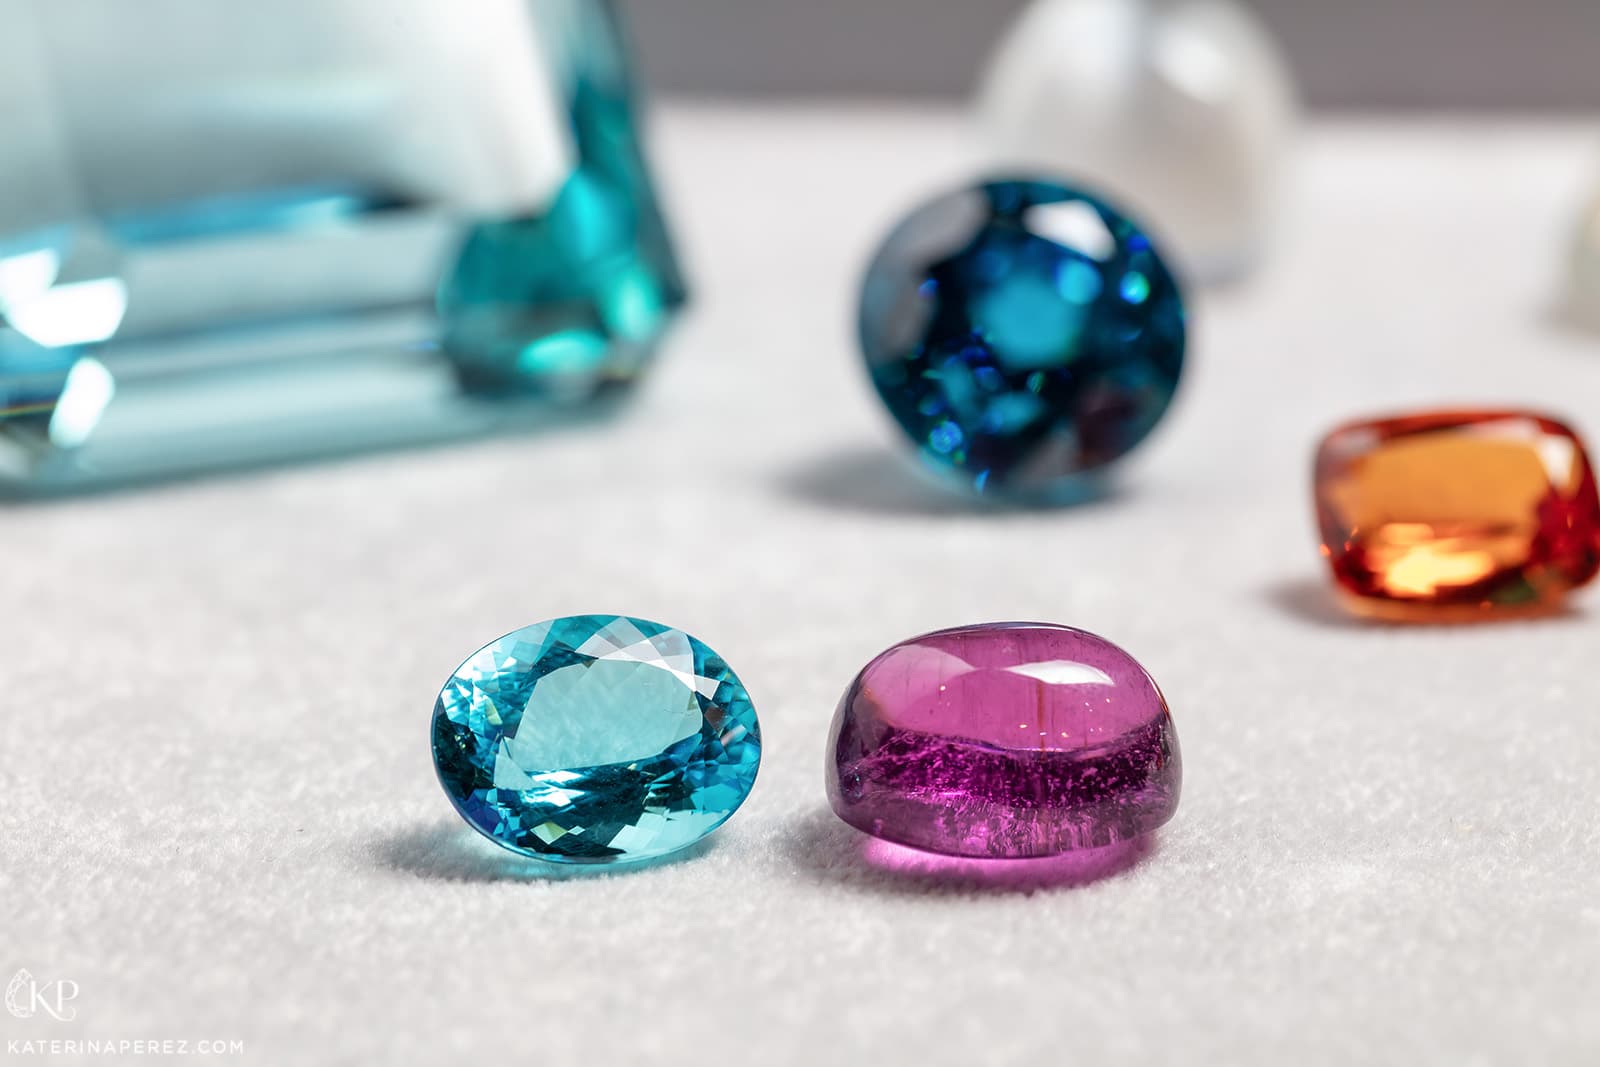 Two tourmalines from Mozambique, 16 cts and 24 cts, available at P&P Gems. Photo by Simon Martner